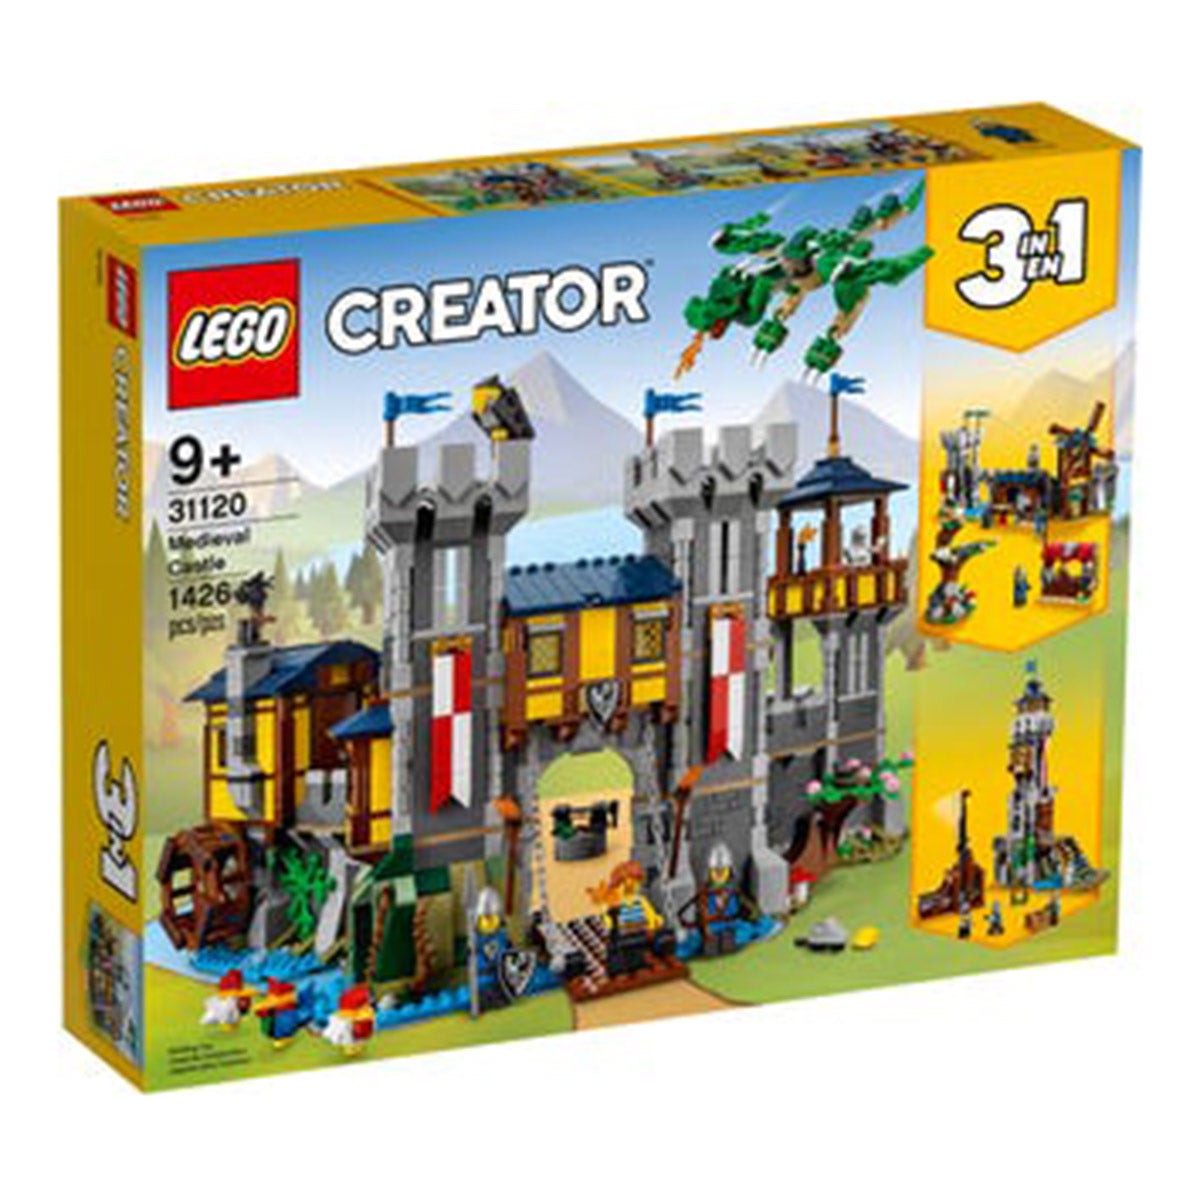 LEGO JOUET K.I.D. INC Toys & Games LEGO Creator 3-in-1 Medieval Castle, 31120, Ages 9+, 1426 Pieces 673419341172